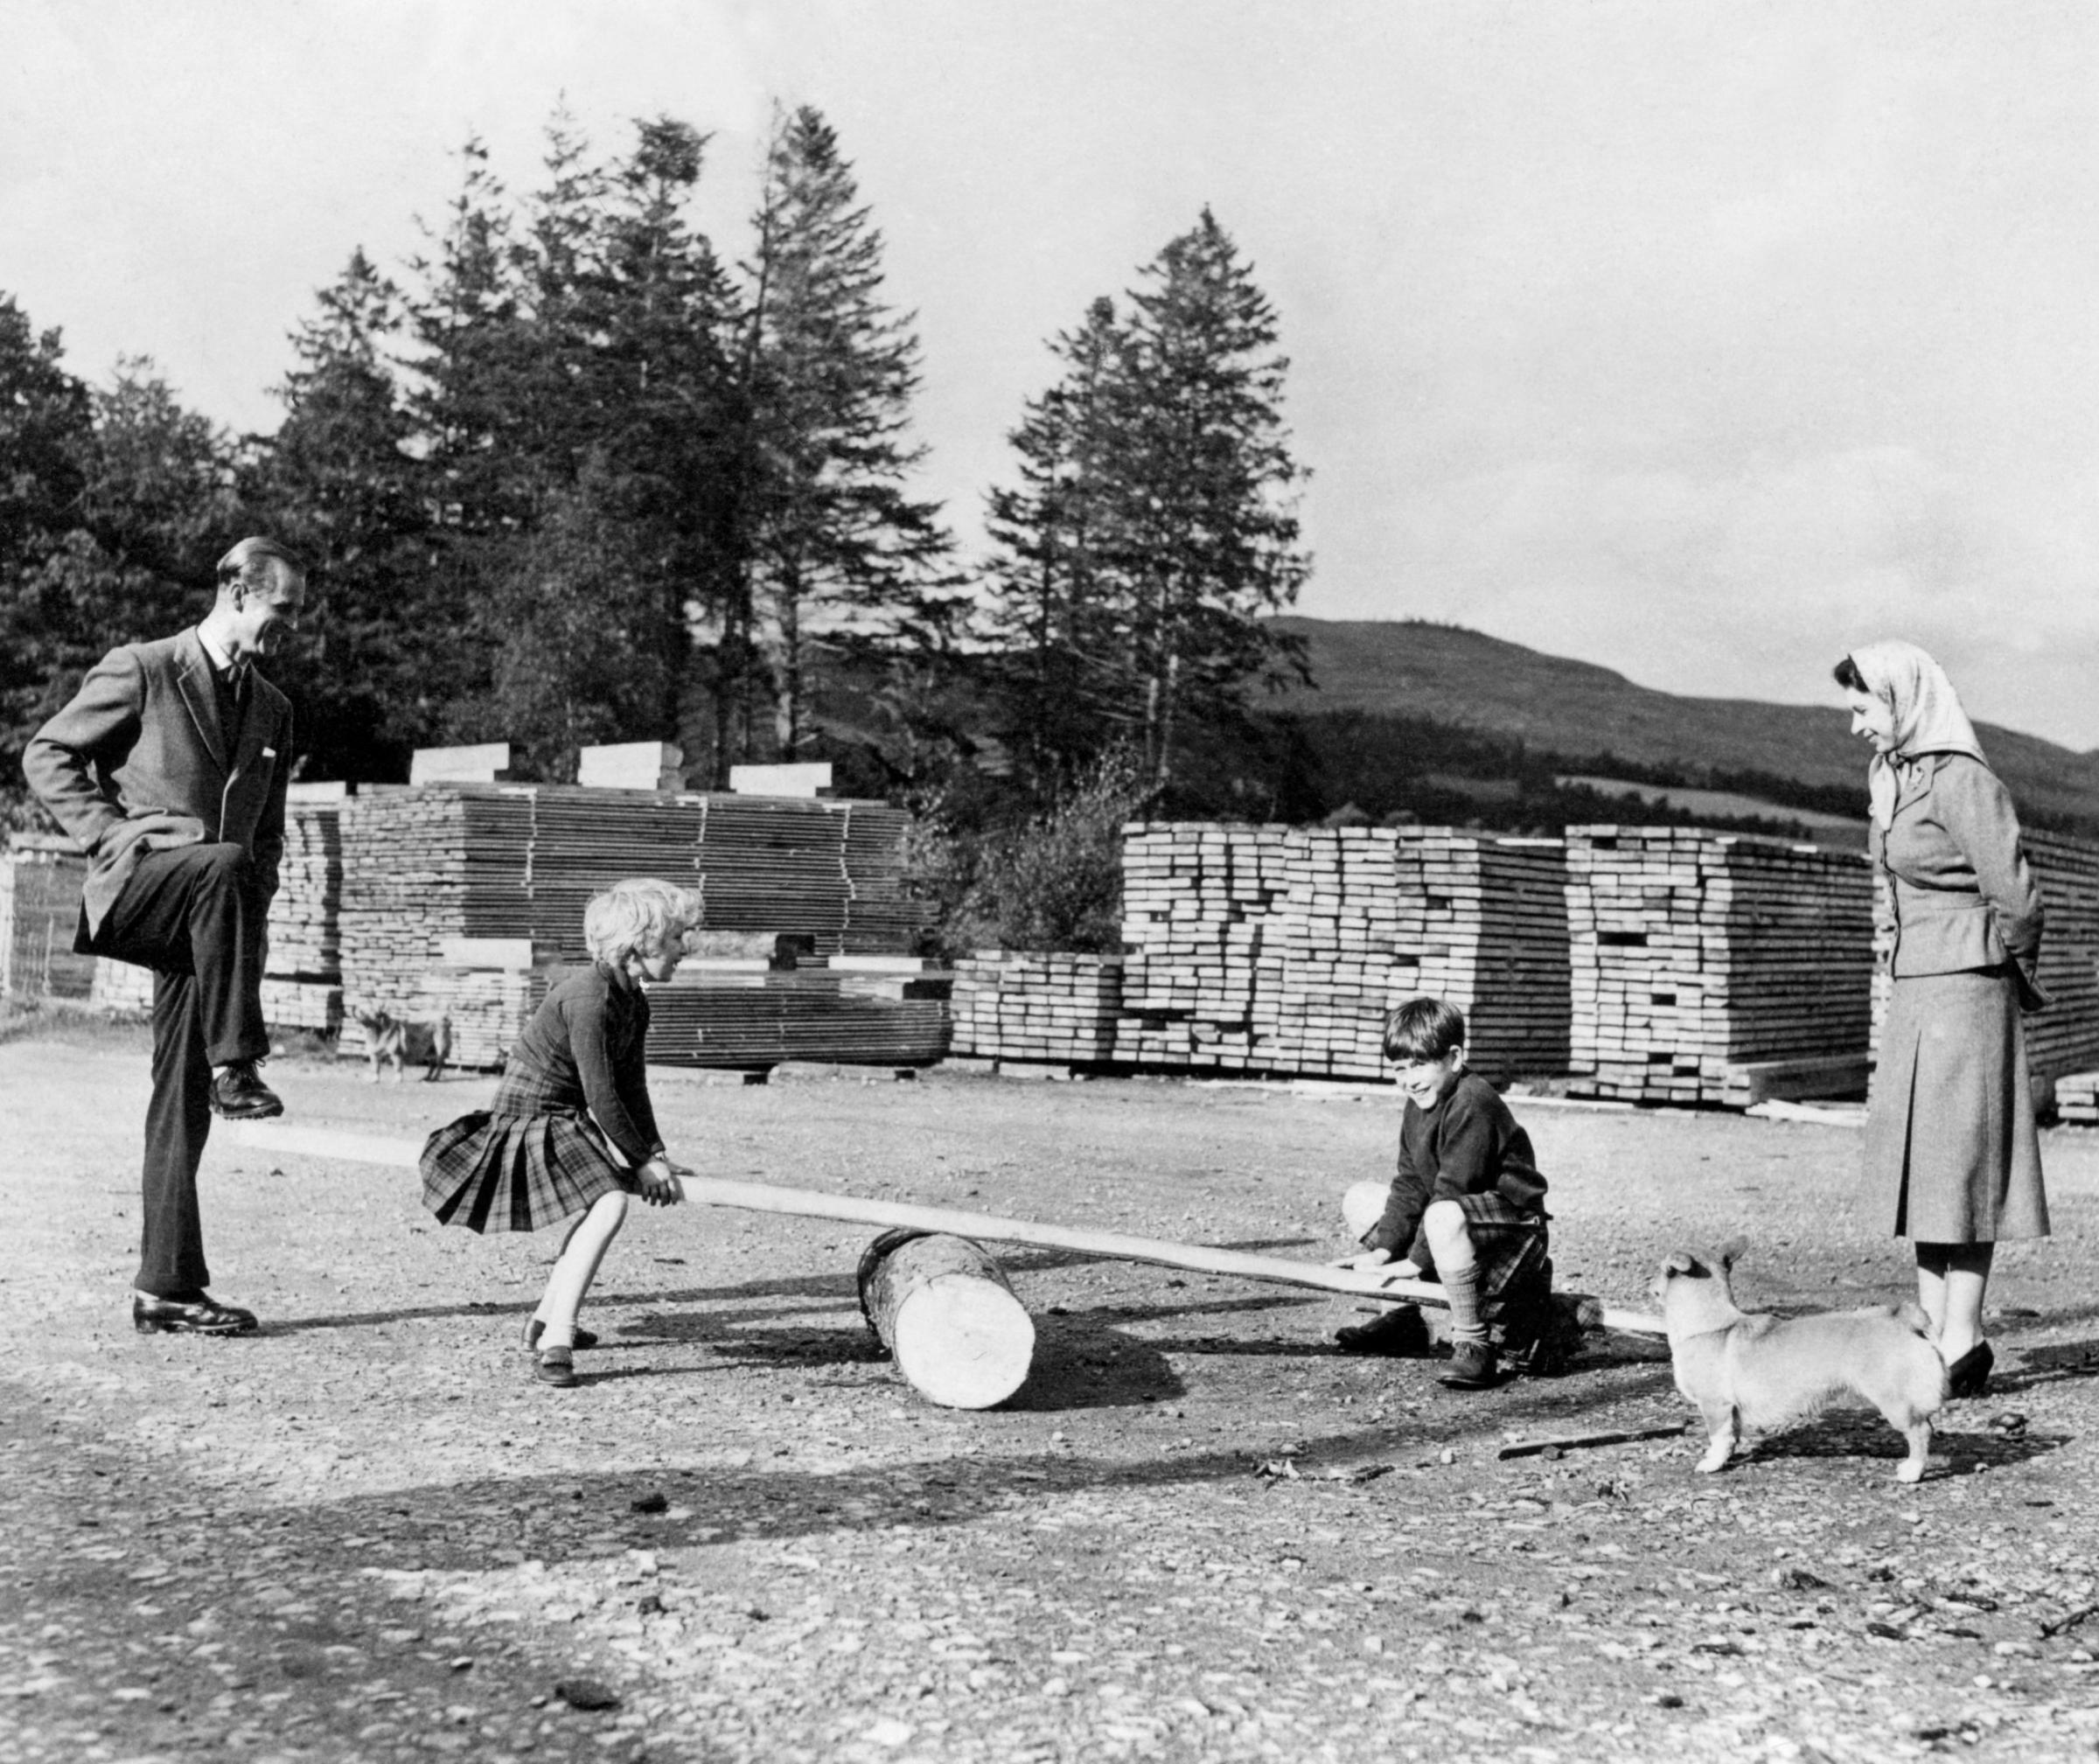 The Prince of Wales with his sister Princess Anne, watched closely by their parents, Queen Elizabeth II and the Duke of Edinburgh, playing on a see-saw made from a log and a plank of wood with the help of their father on the Balmoral Estate.